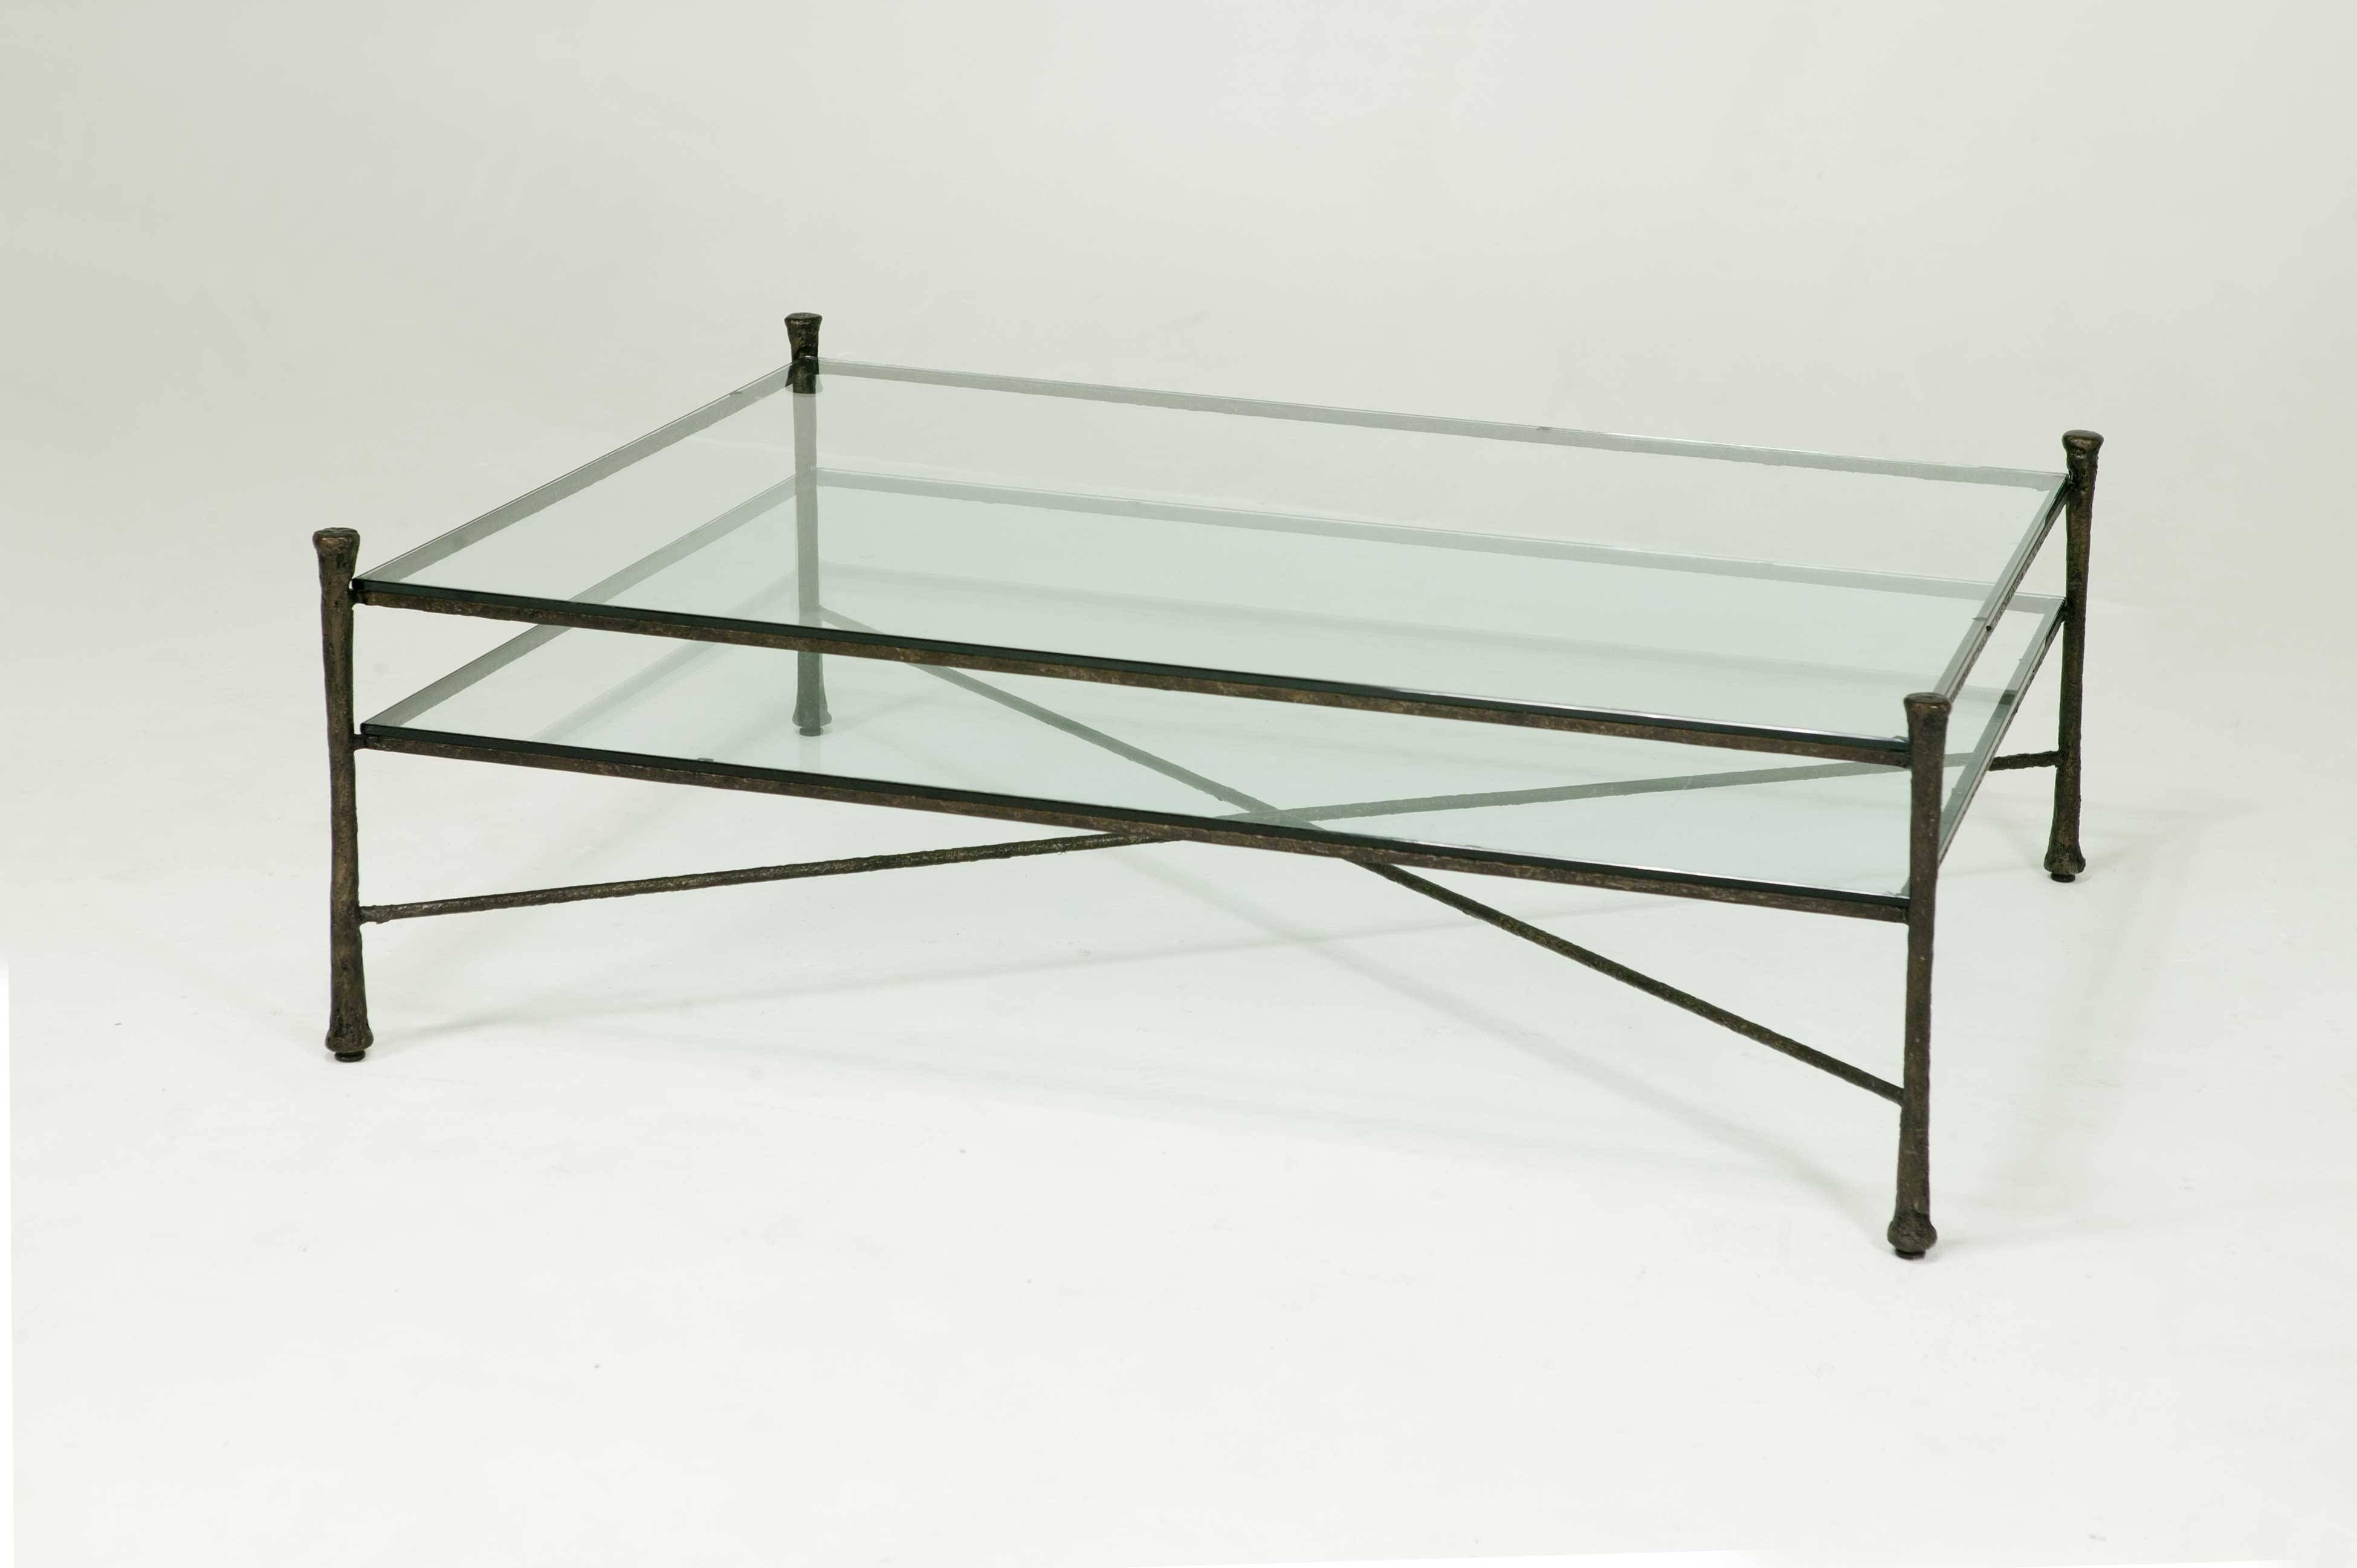 Glass And Wrought Iron Coffee Tables Uk | Coffee Tables Decoration Within Metal Square Coffee Tables (View 14 of 30)